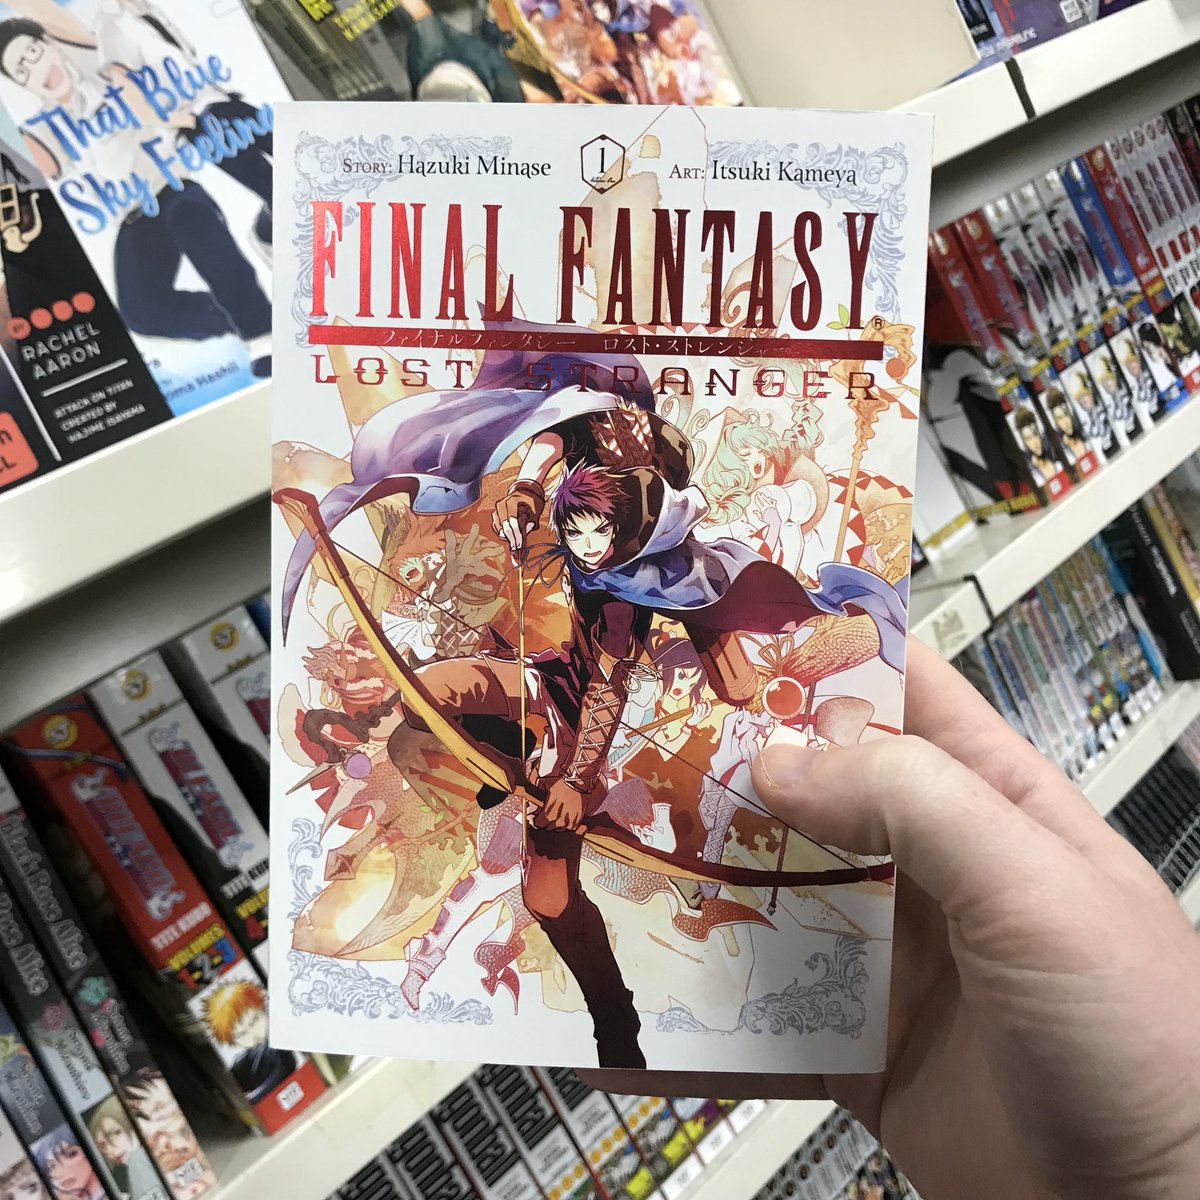 Forbidden Planet Leicester Calling All Finalfantasy Fans New Manga Lost Stranger Is In Stock Now Unfortunately There S No Sign Of Quina As Yet But It S Only Volume 1 So Give